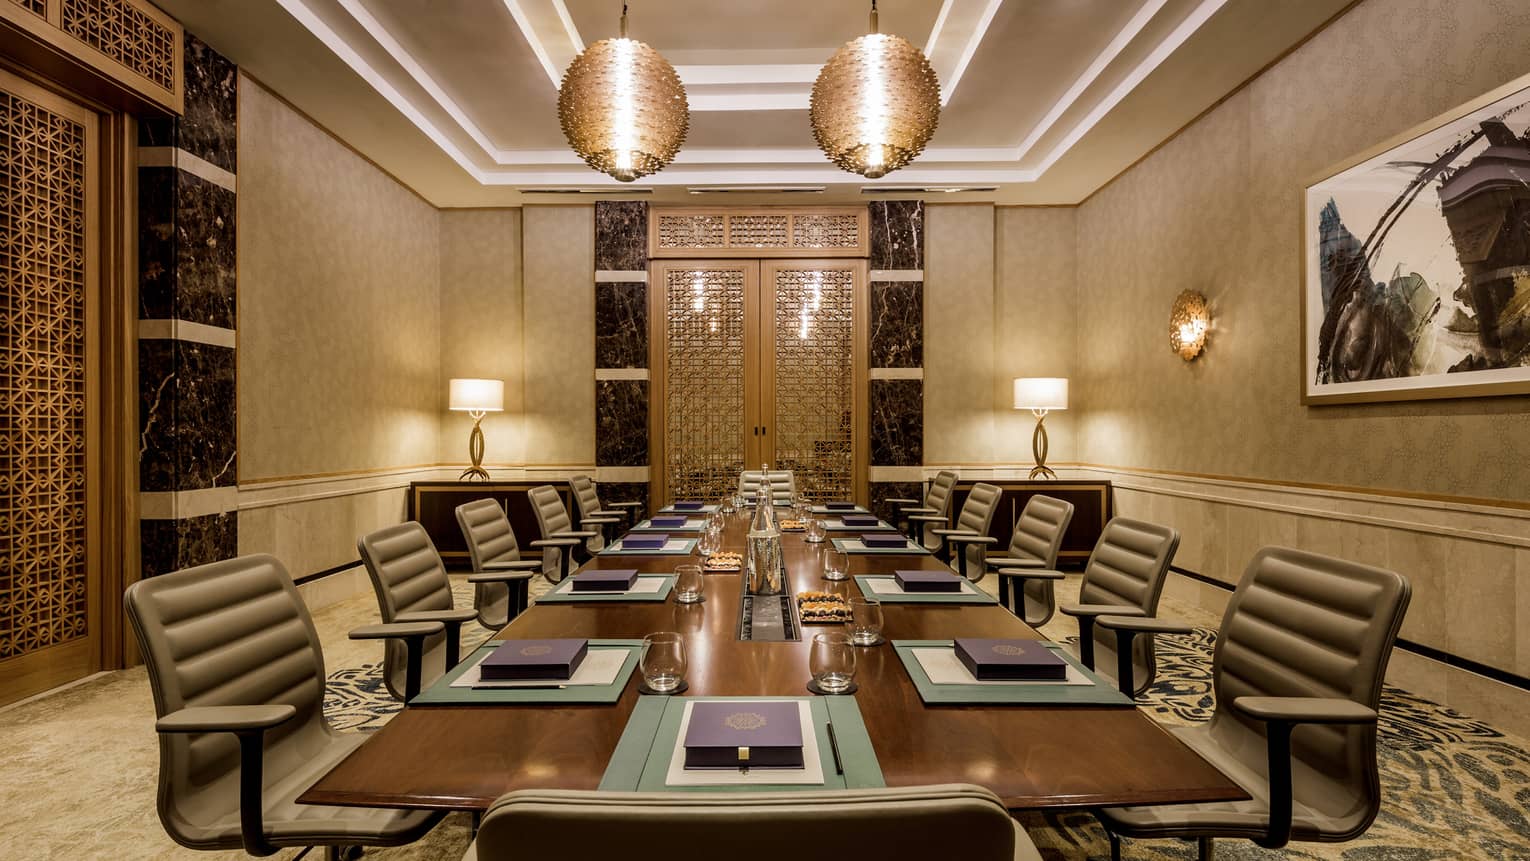 Executive table with large chairs in intimate boardroom accented with gold, ornate lights 